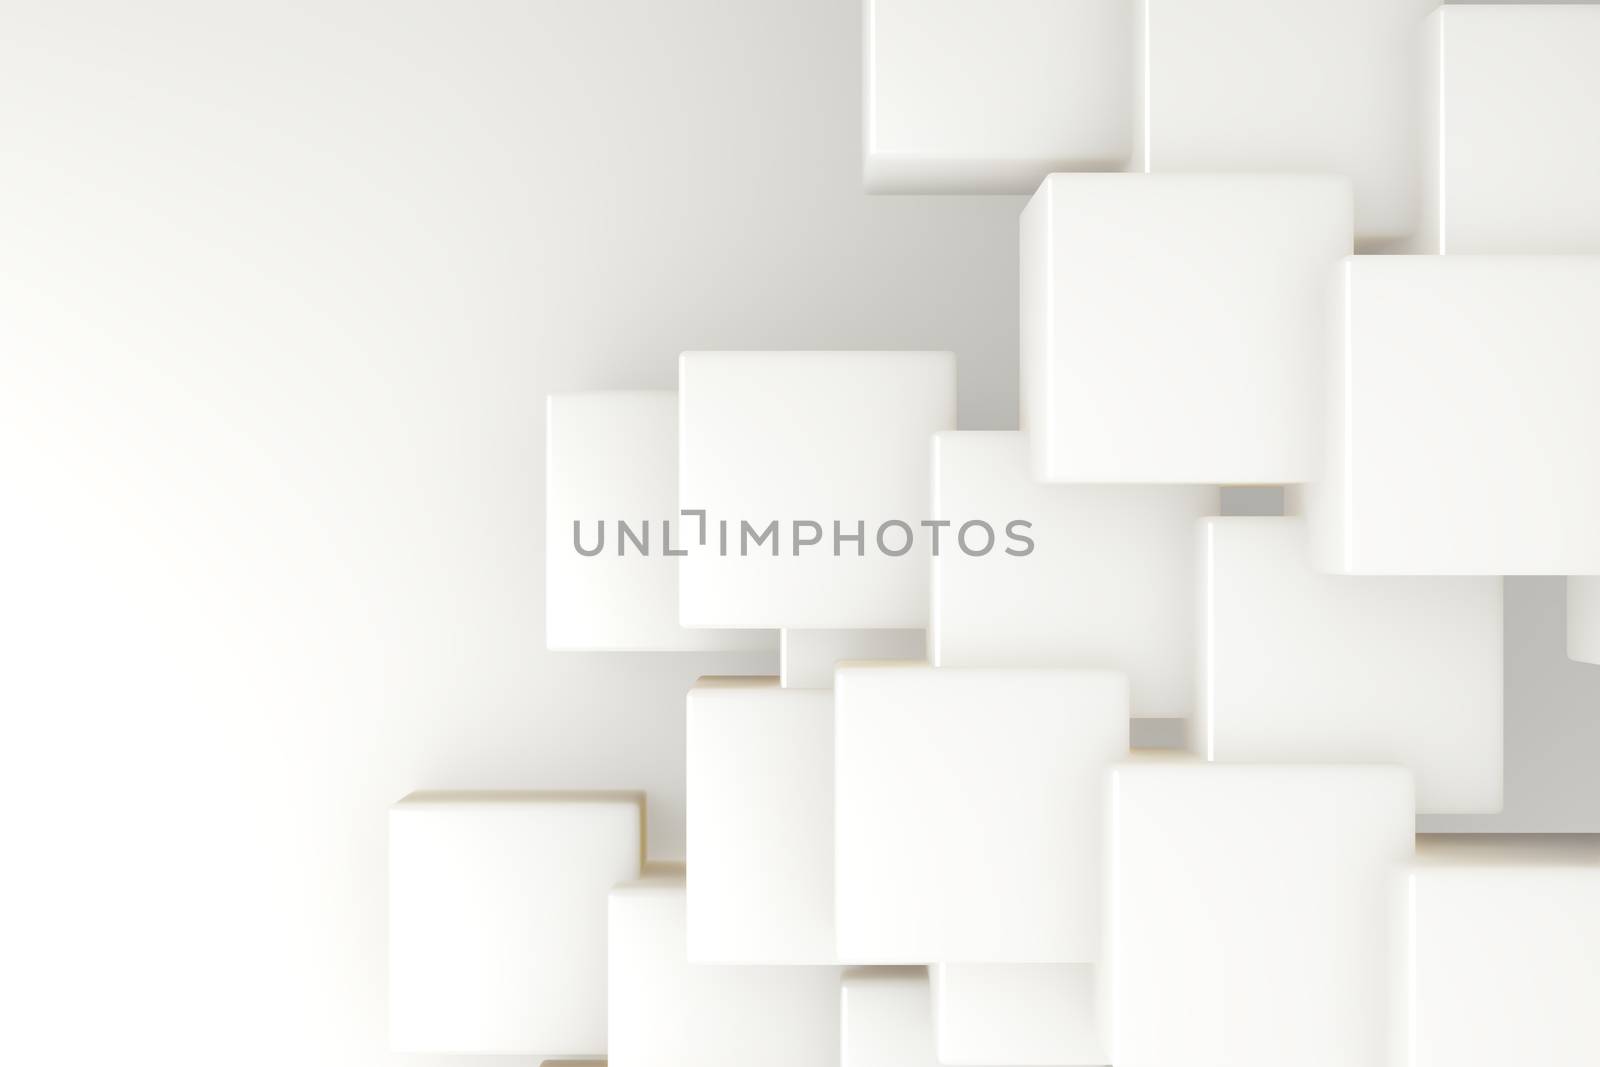 Abstract white design by Wavebreakmedia